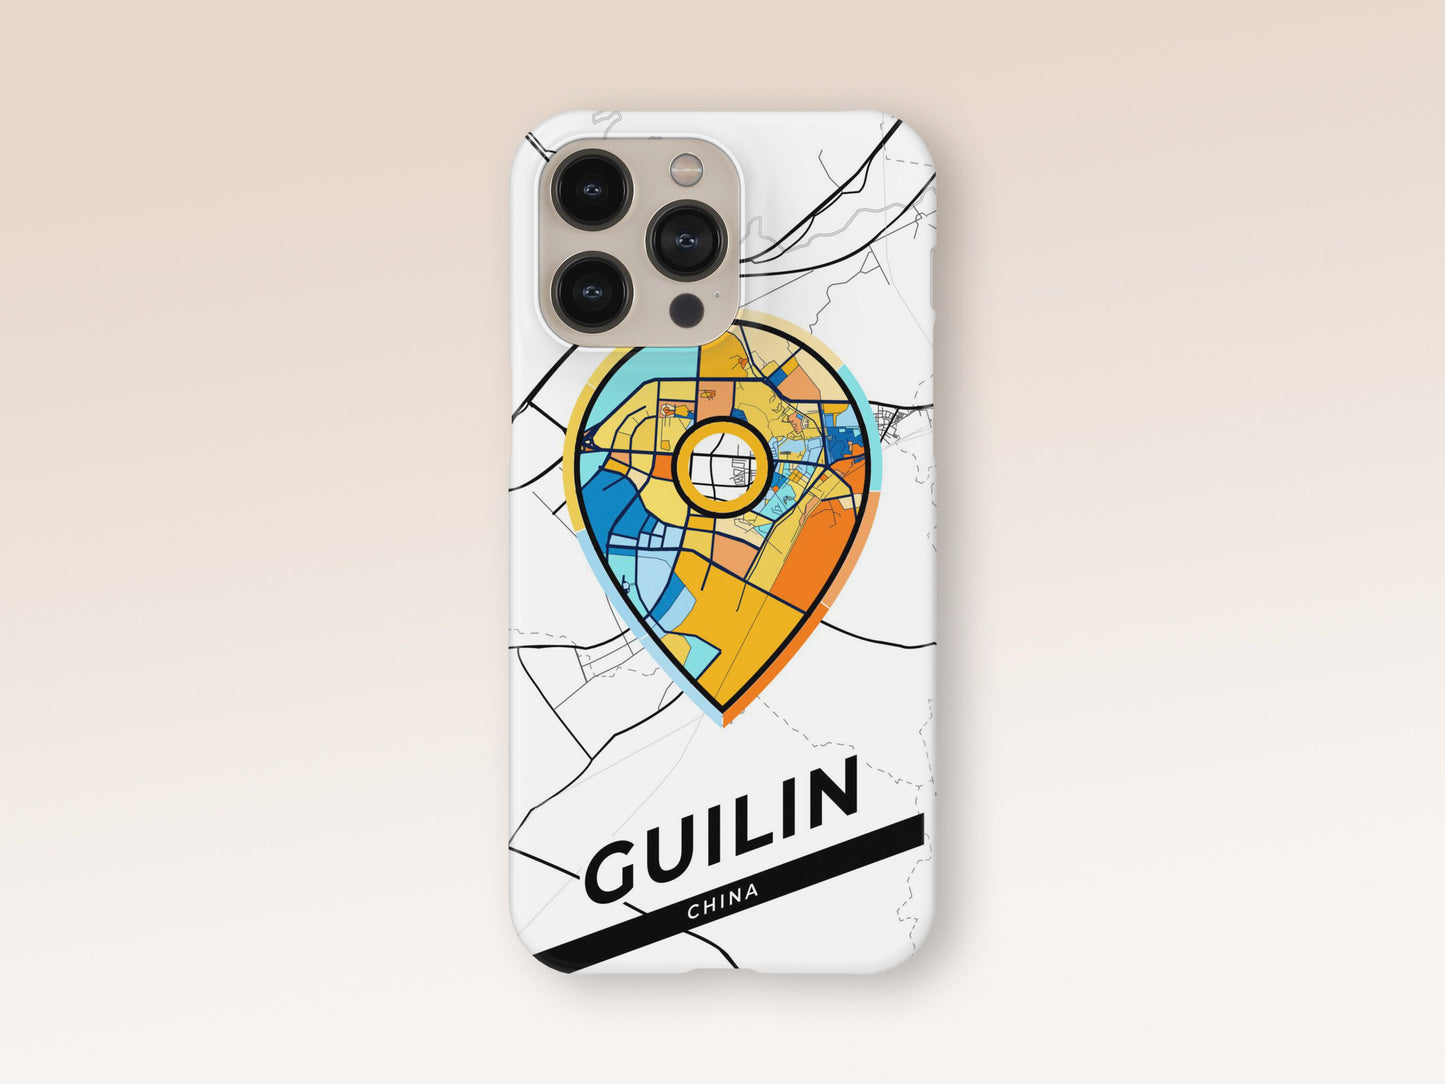 Guilin China slim phone case with colorful icon. Birthday, wedding or housewarming gift. Couple match cases. 1